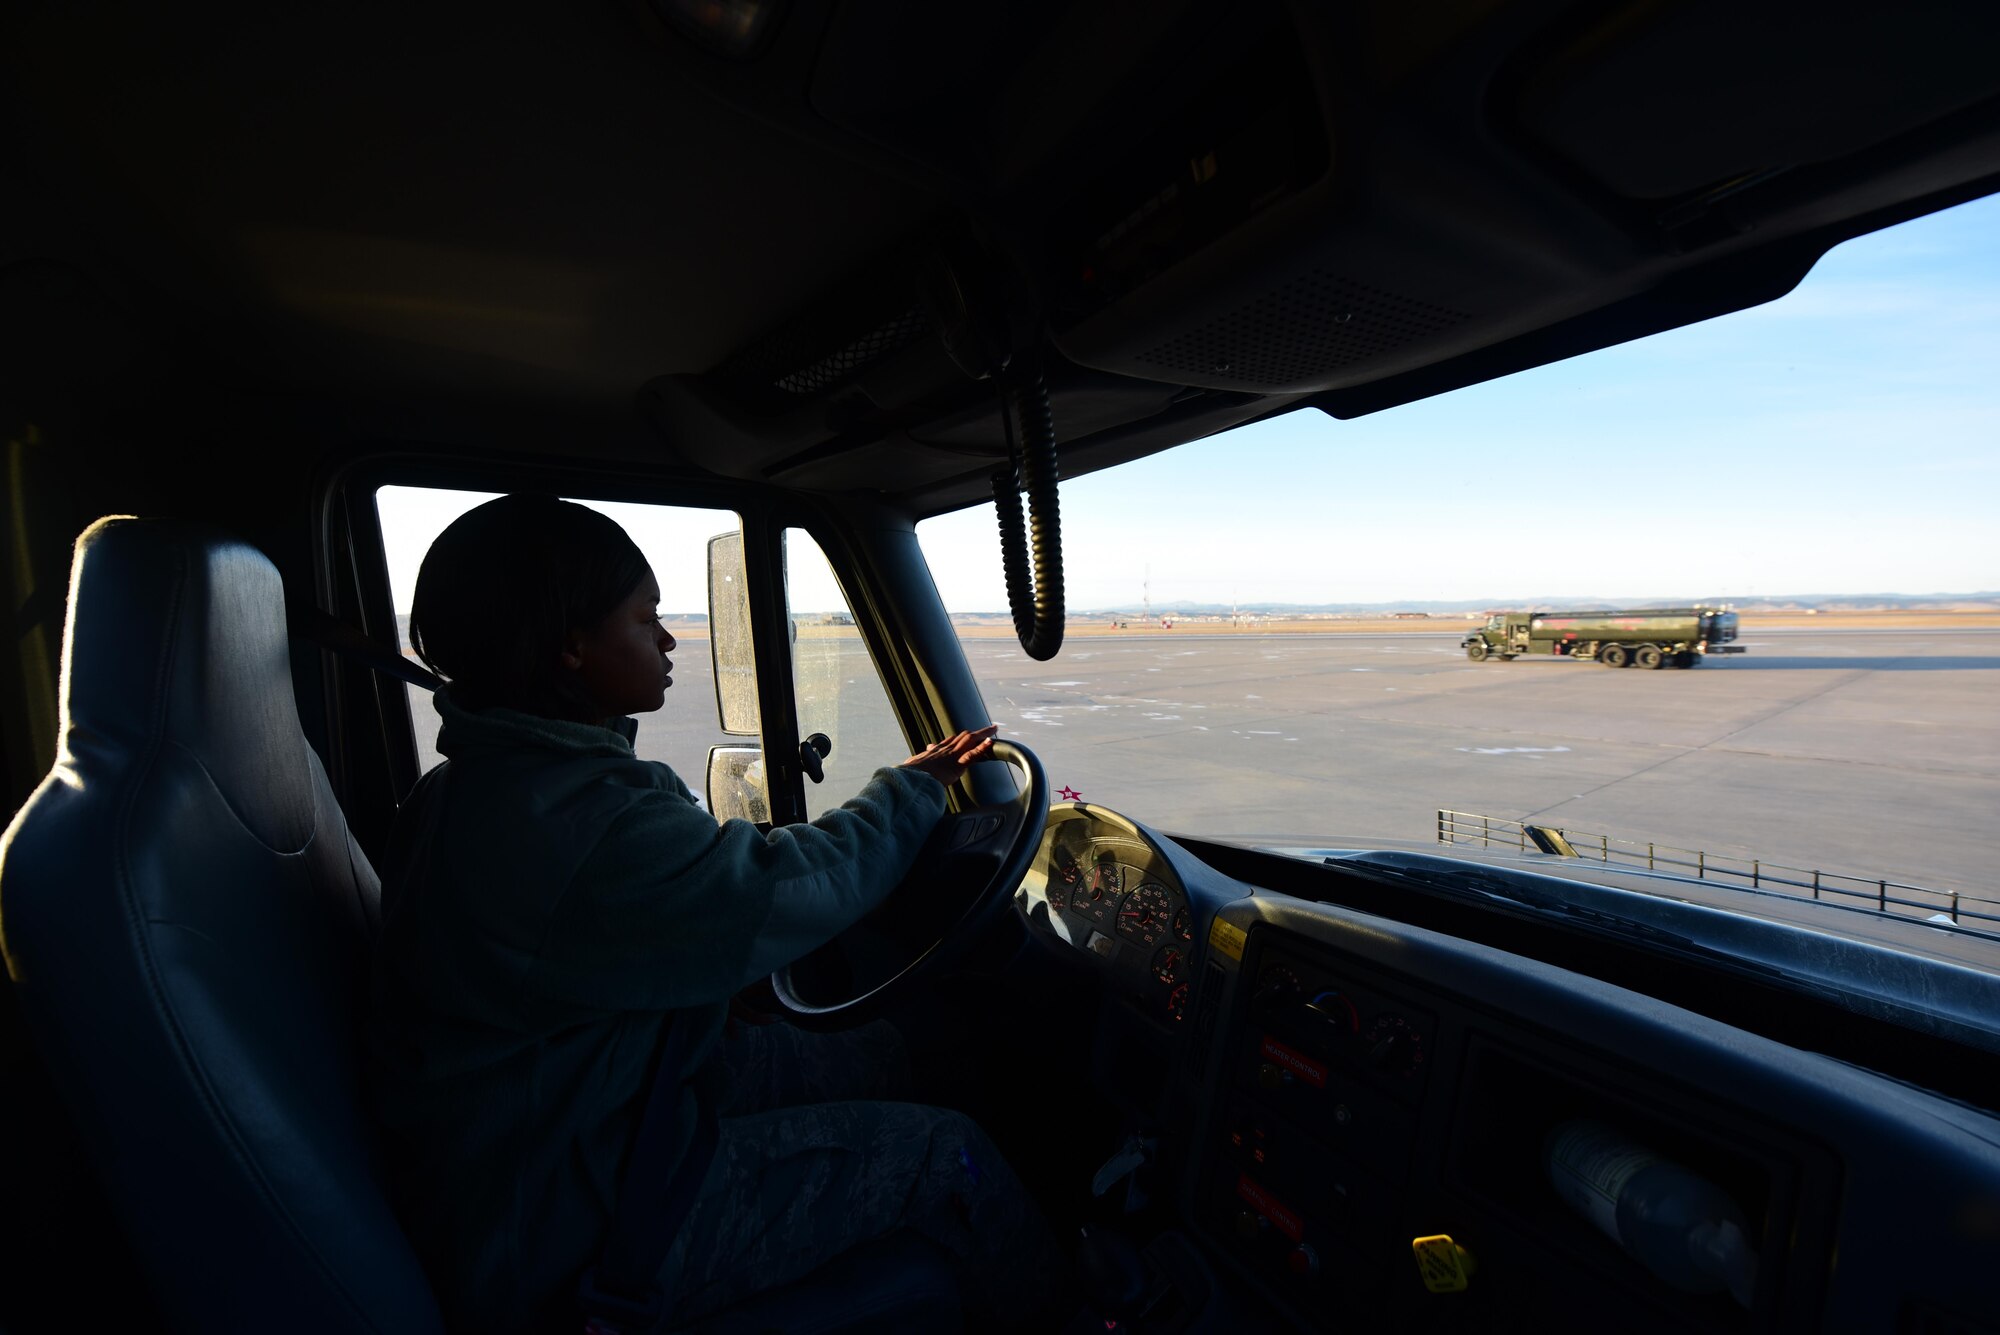 Airman 1st Class Shontaedrian Bills a fuels distribution operator assigned to the 28th Logistics Readiness Squadron, prepares to refuel another fuel truck at Ellsworth Air Force Base S.D., Dec. 14, 2016. In addition to providing fuel to vehicles as well as the B-1, the distribution flight also inspect vehicles to ensure fluid levels, hose pressure, and lights work keeping the fleet of 15 refueling vehicles ready and serviceable at all times. (U.S. Air Force photo by Airman 1st Class James L. Miller)